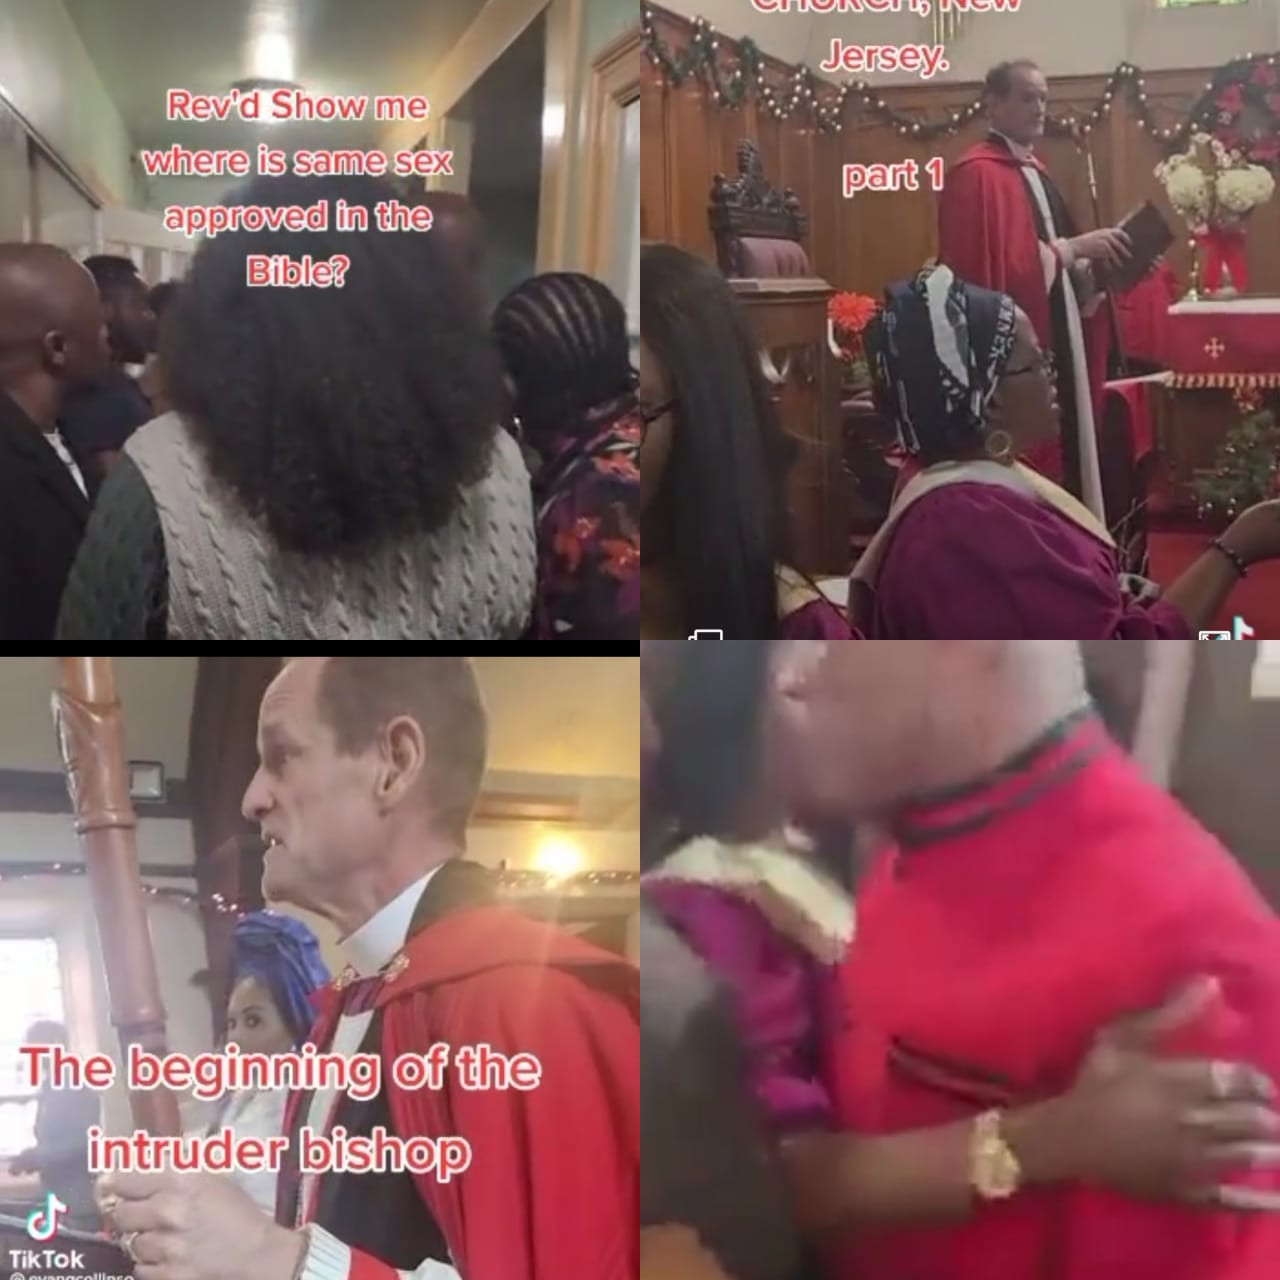 Nigerians In US Call For Arrest Of An Anglican Bishop Who Believes In Same S3x Marriage